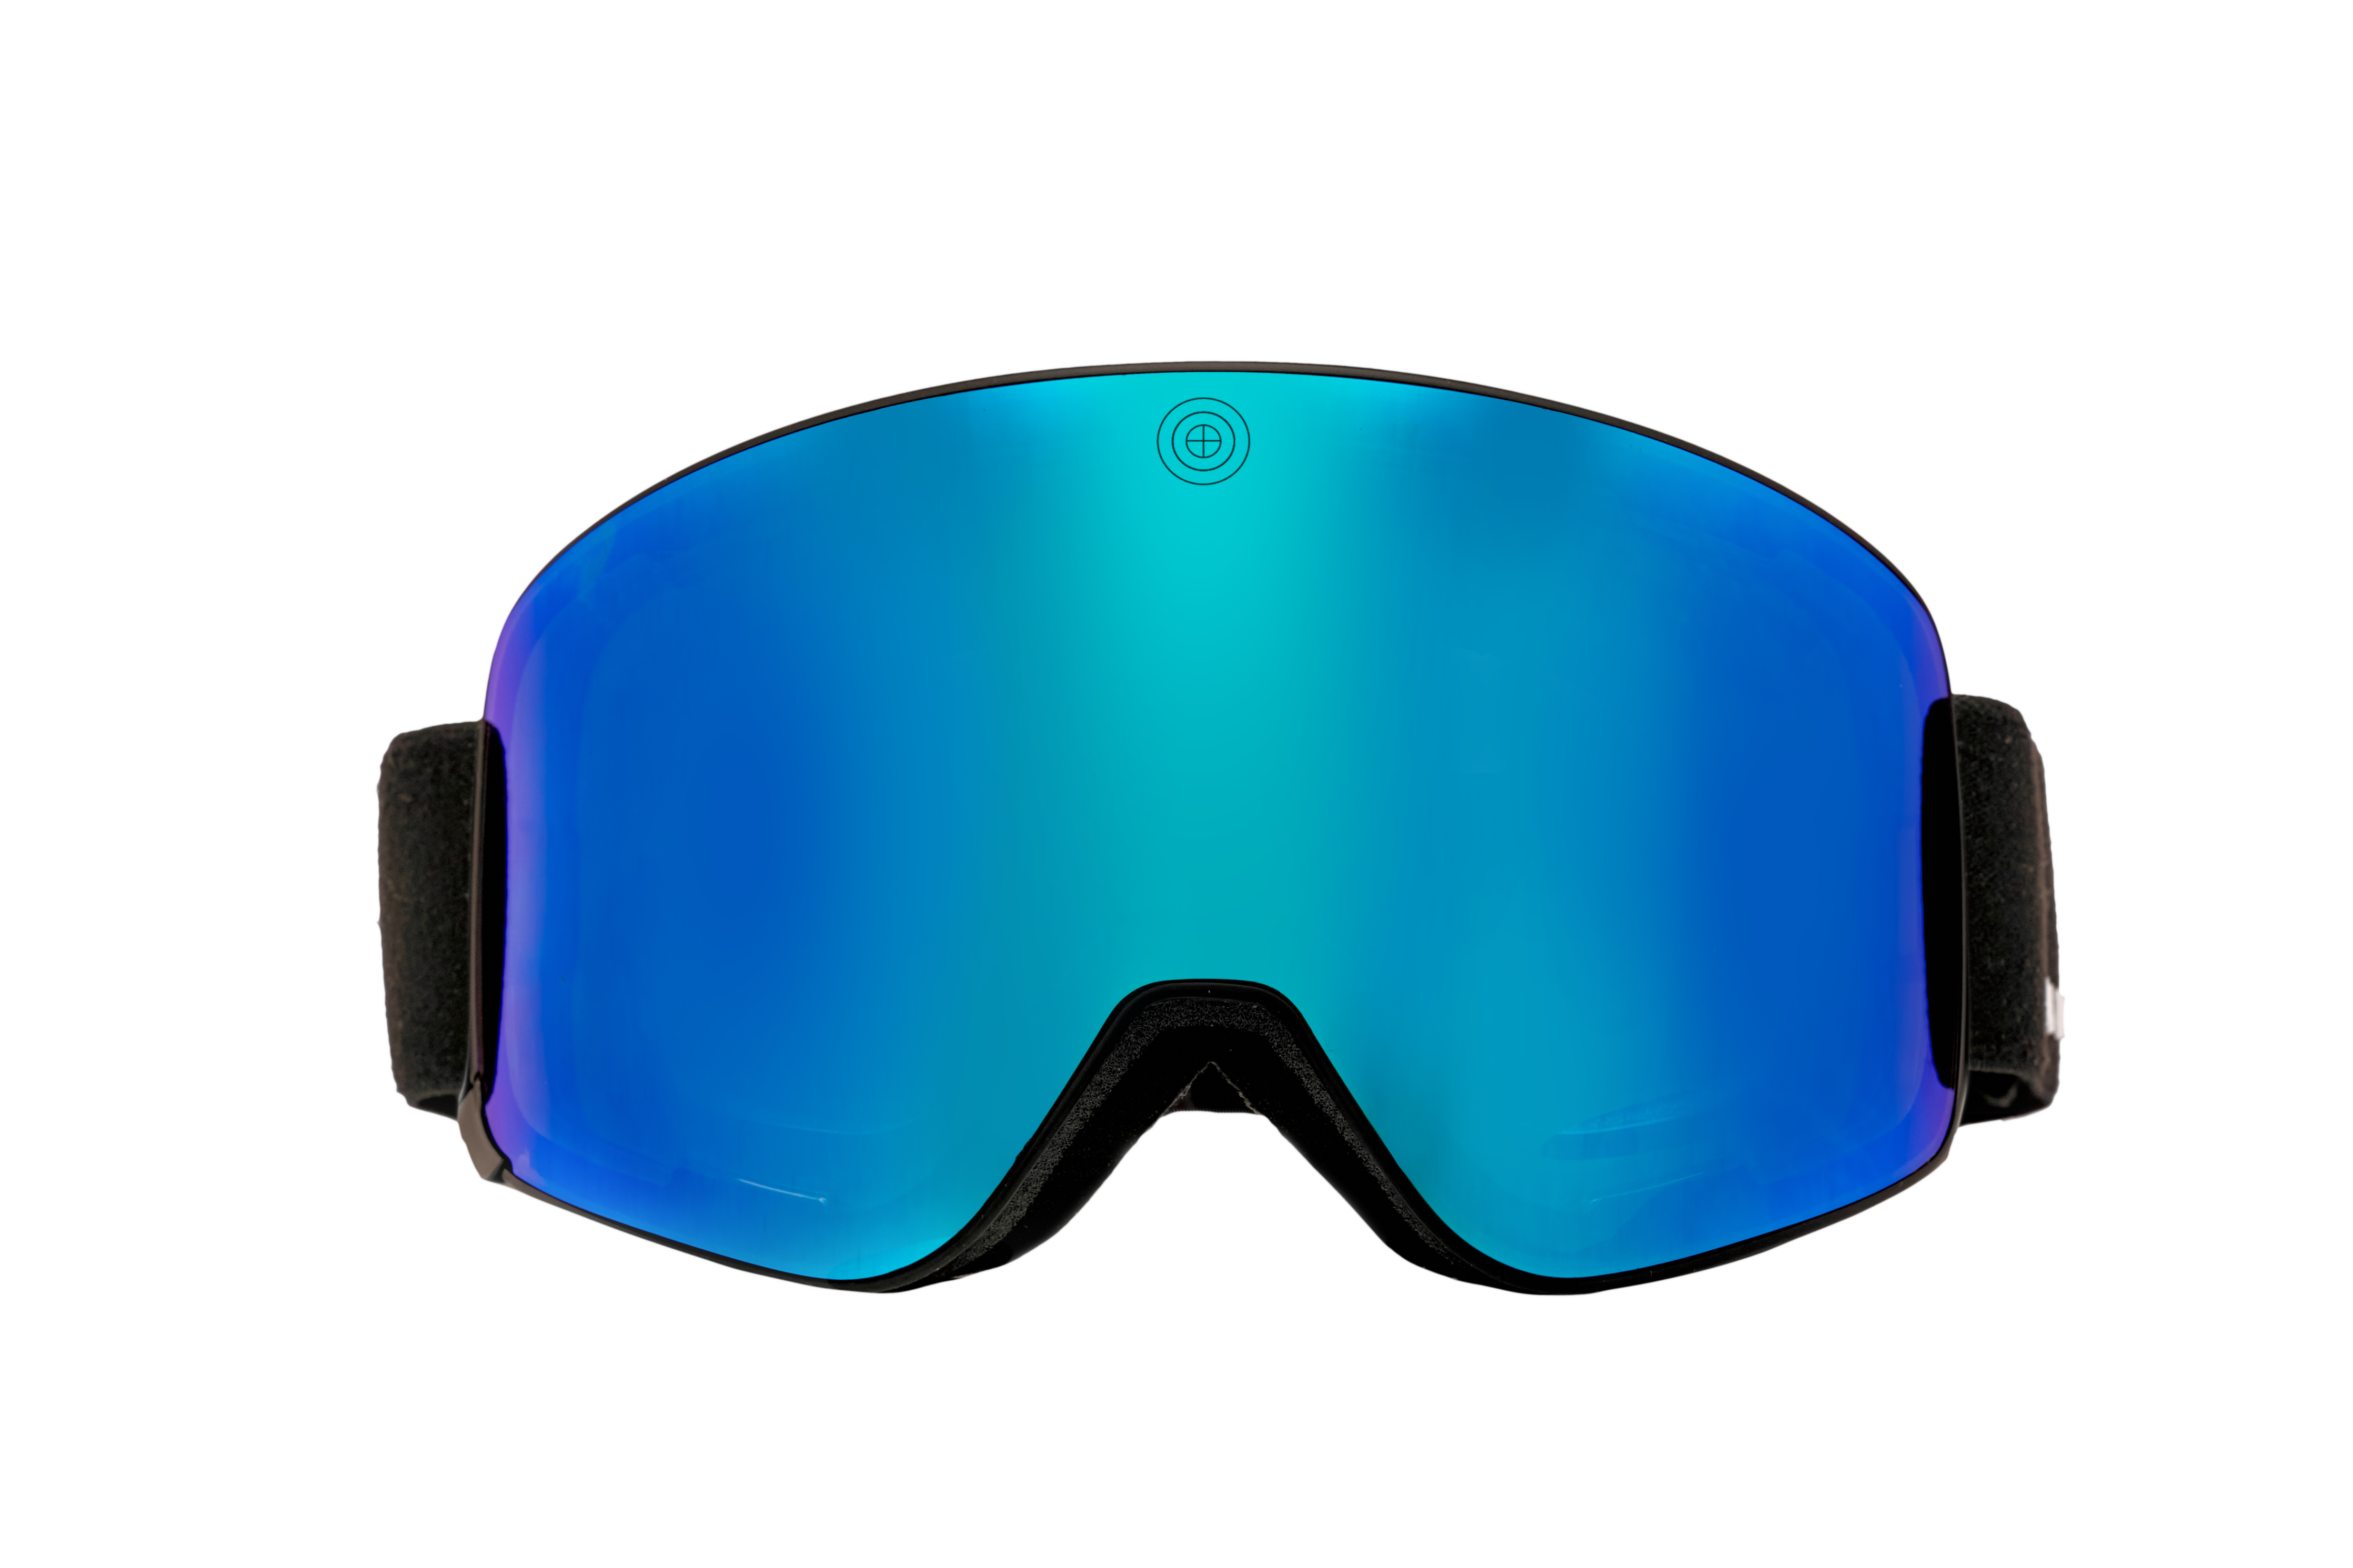 Ski goggle strap design  Other clothing or merchandise contest